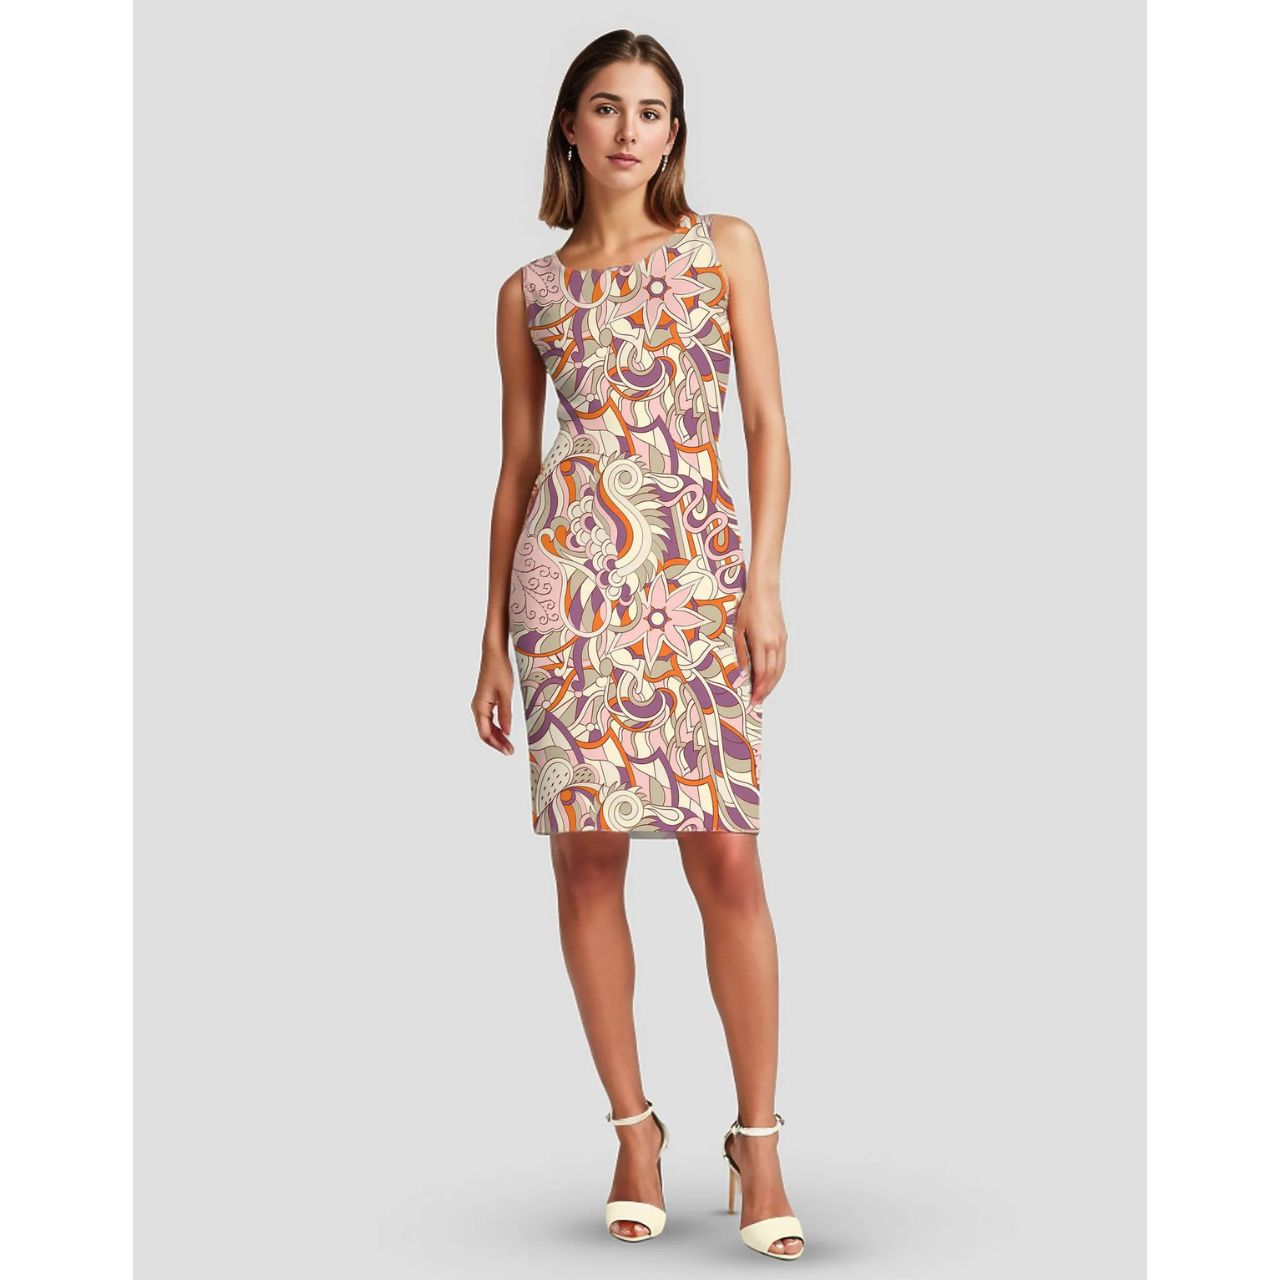 Amai sleeveless above knee-length cocktail sheath dress psychedelic abstract floral paisley swirls retro Designer Print Pink Violet Round Neck Form fitted bodycon Blissfully Brand